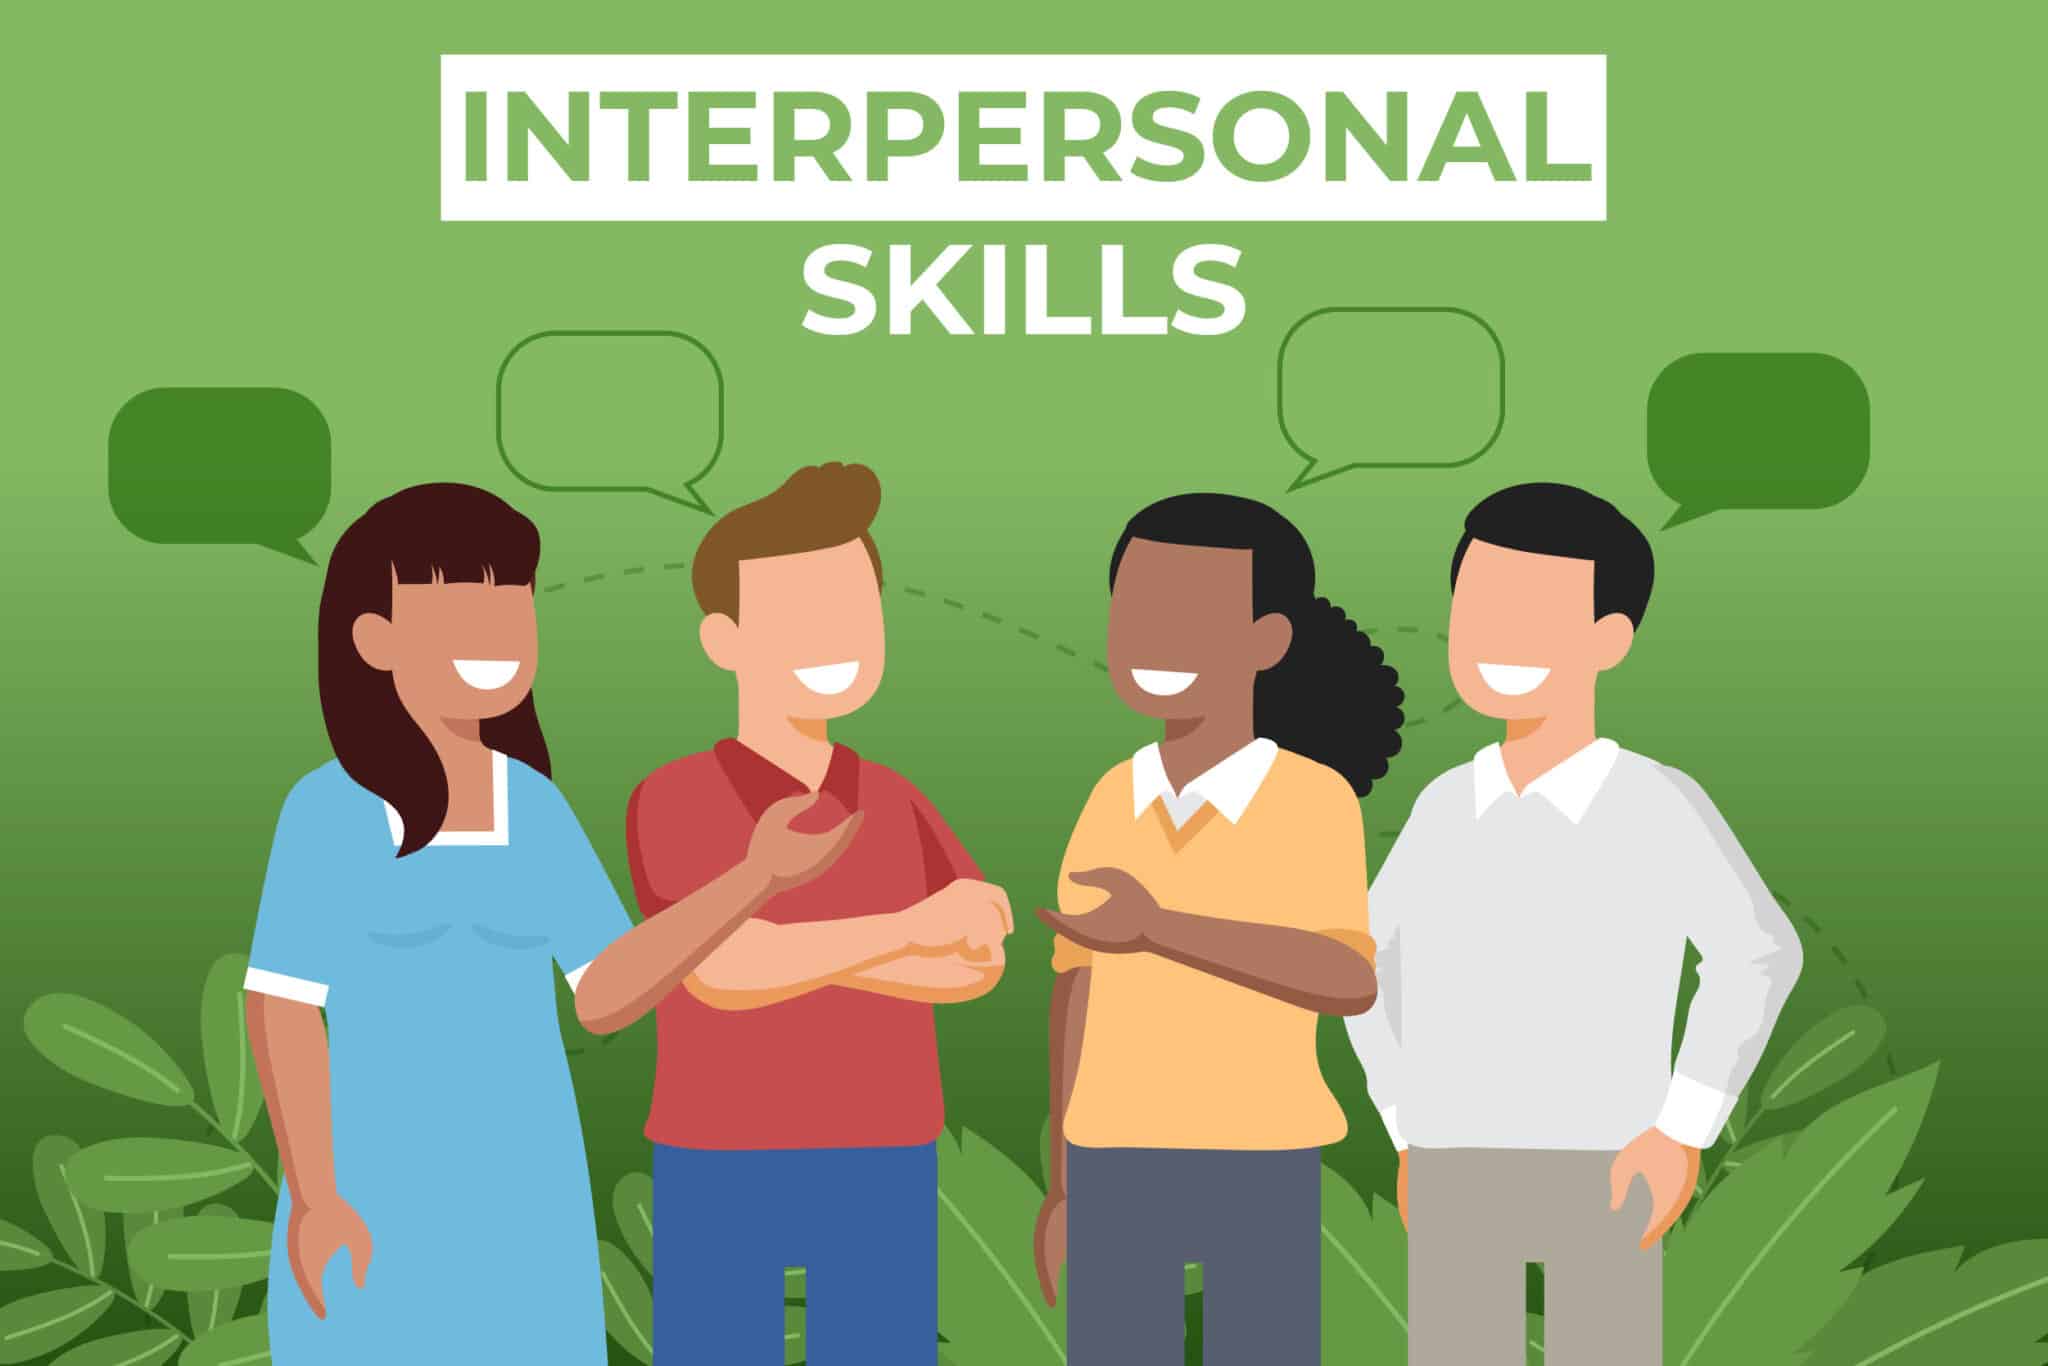 Interpersonal skills are essential for any job that involves interacting with other people